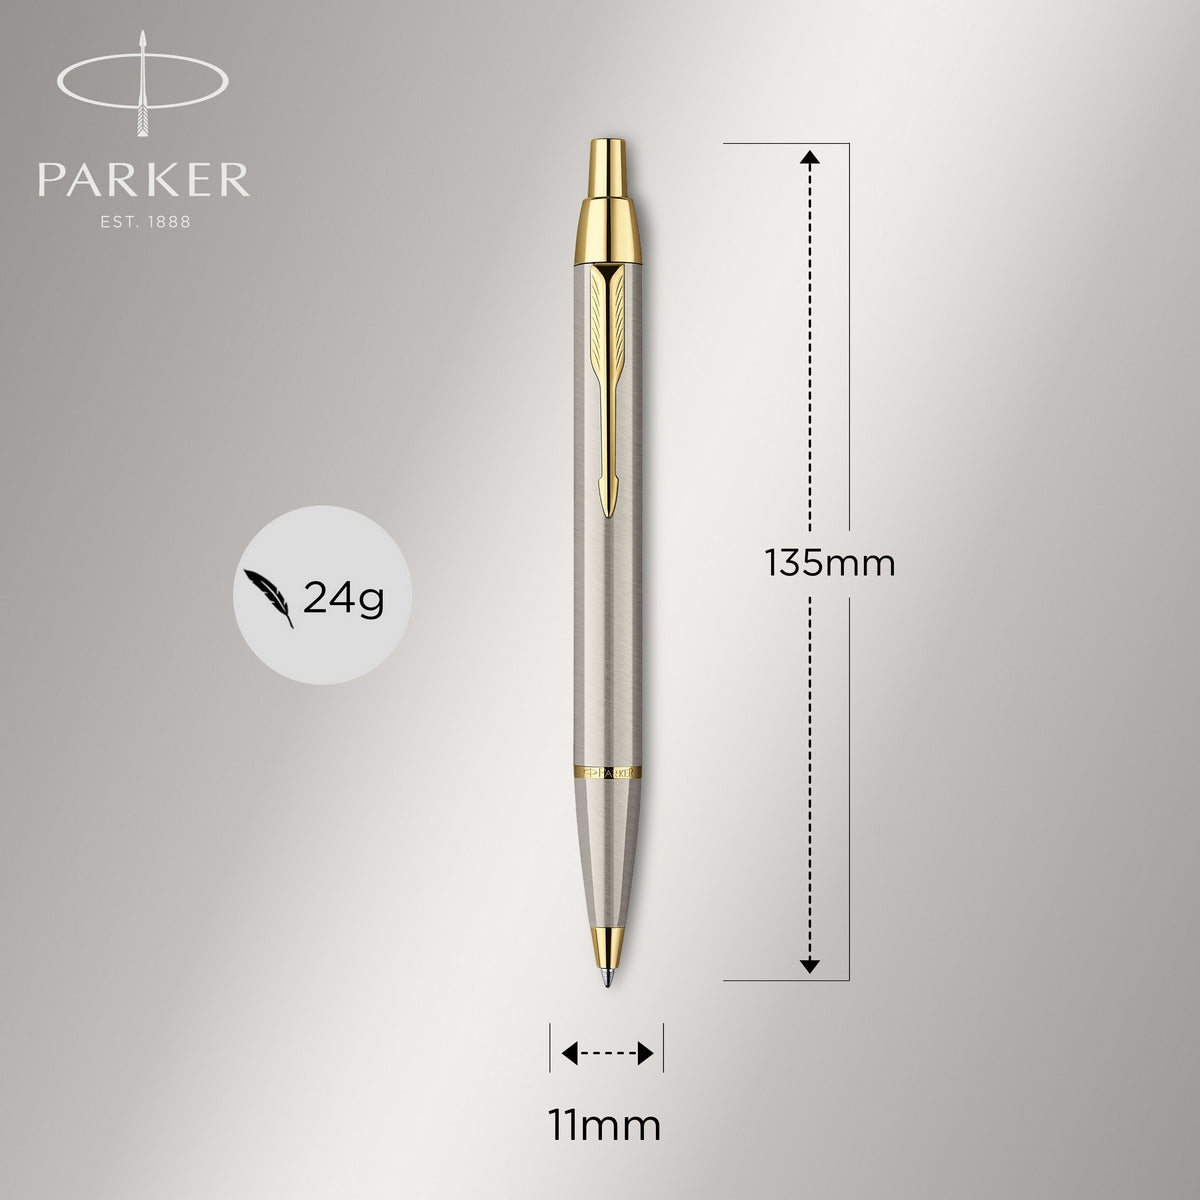 parker im duo gift set with ballpoint pen & rollerball pen brushed metal with gold trim black ink refill & cartridge